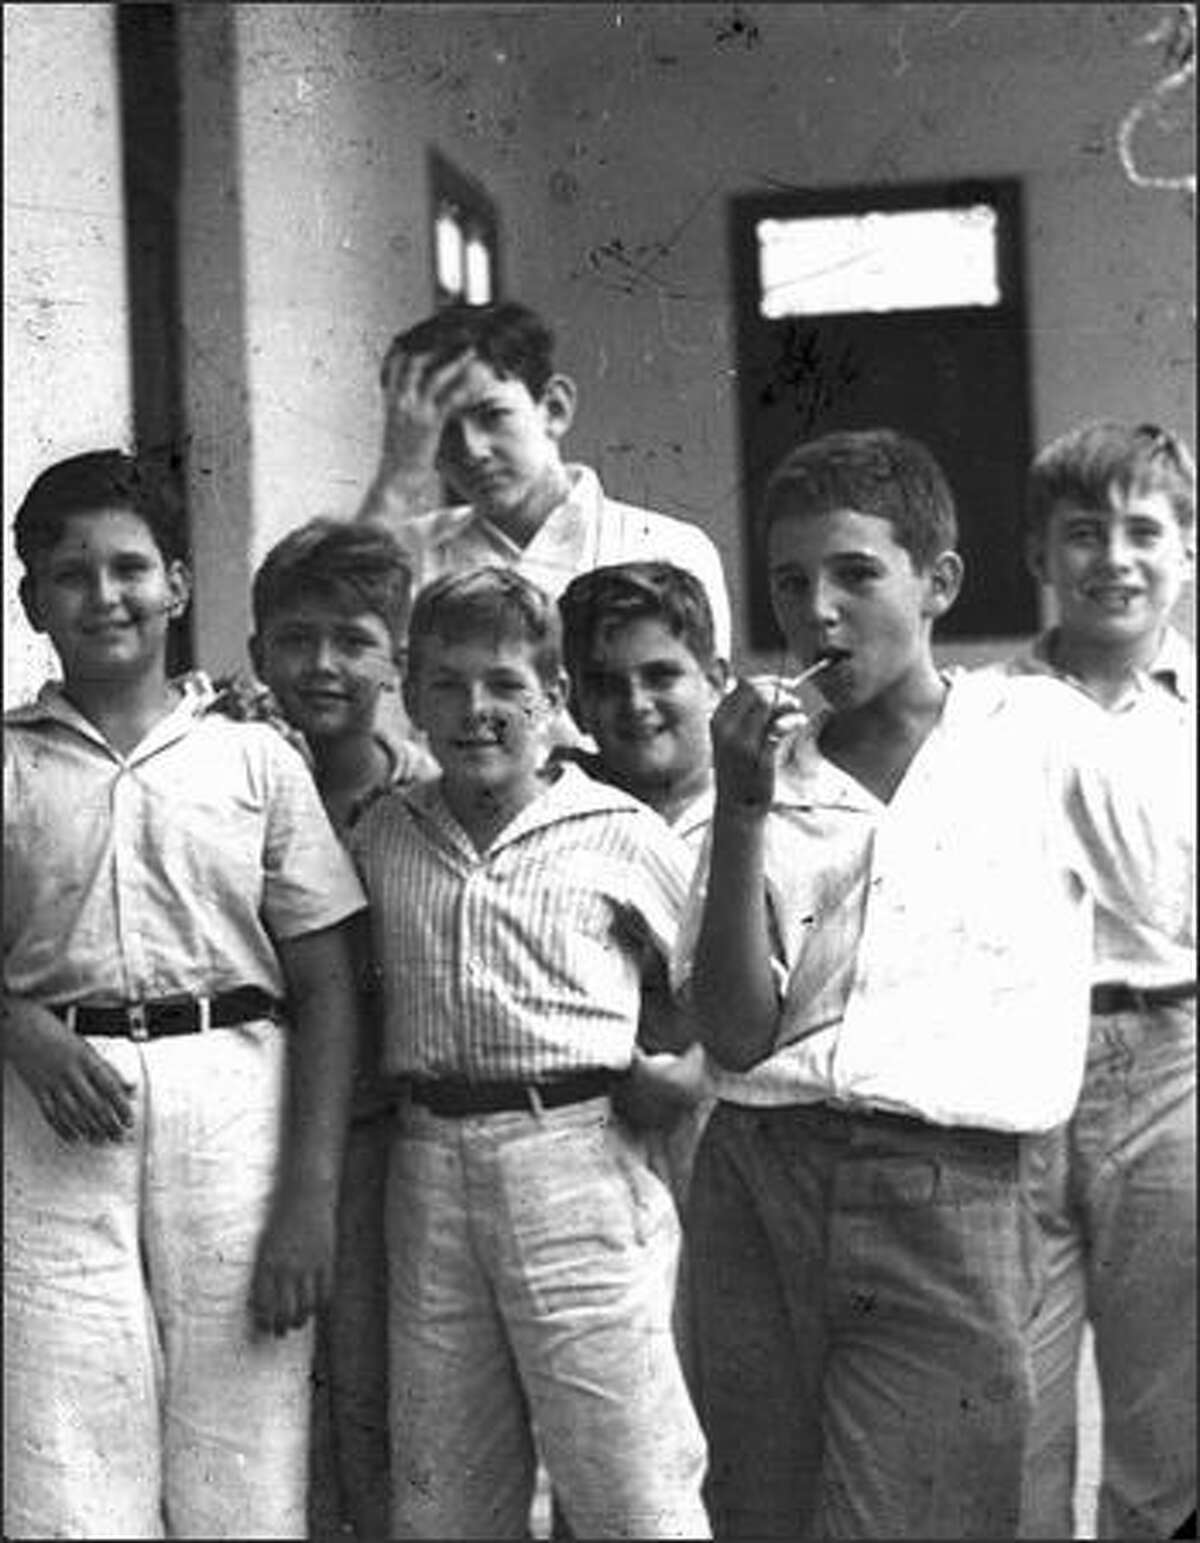 Fidel Castro, right, eats a lollipop in a 1940 photo taken of him and schoolmates when he was studying at the school Nuestra Senora de Dolores in Santiago de Cuba. The photo was taken by Spanish Jesuit Jose Maria Patac. JOSE MARIA PATAC/AFP/Getty Images